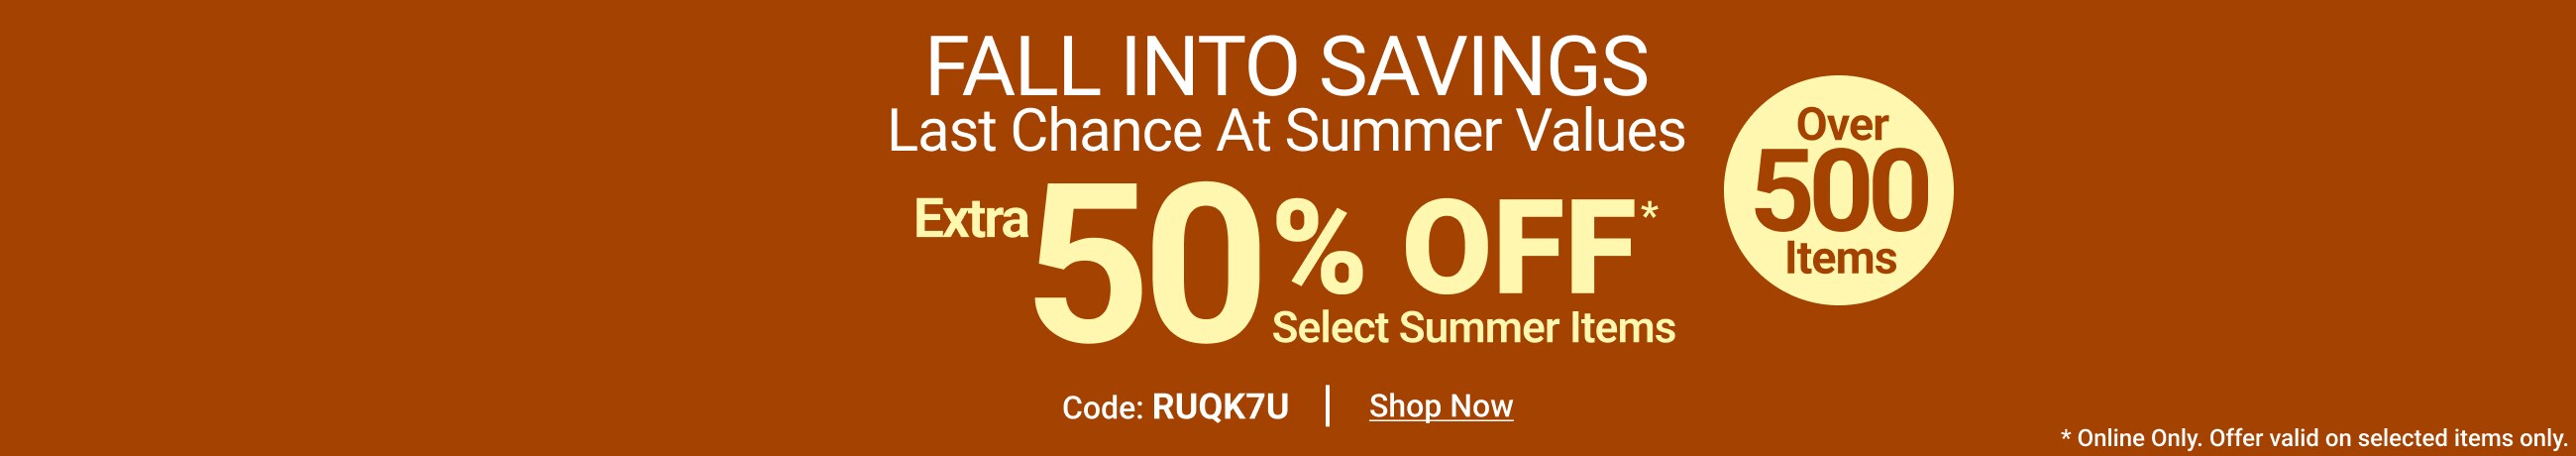 Fall into savings with an extra 50% off summer items - Shop Now